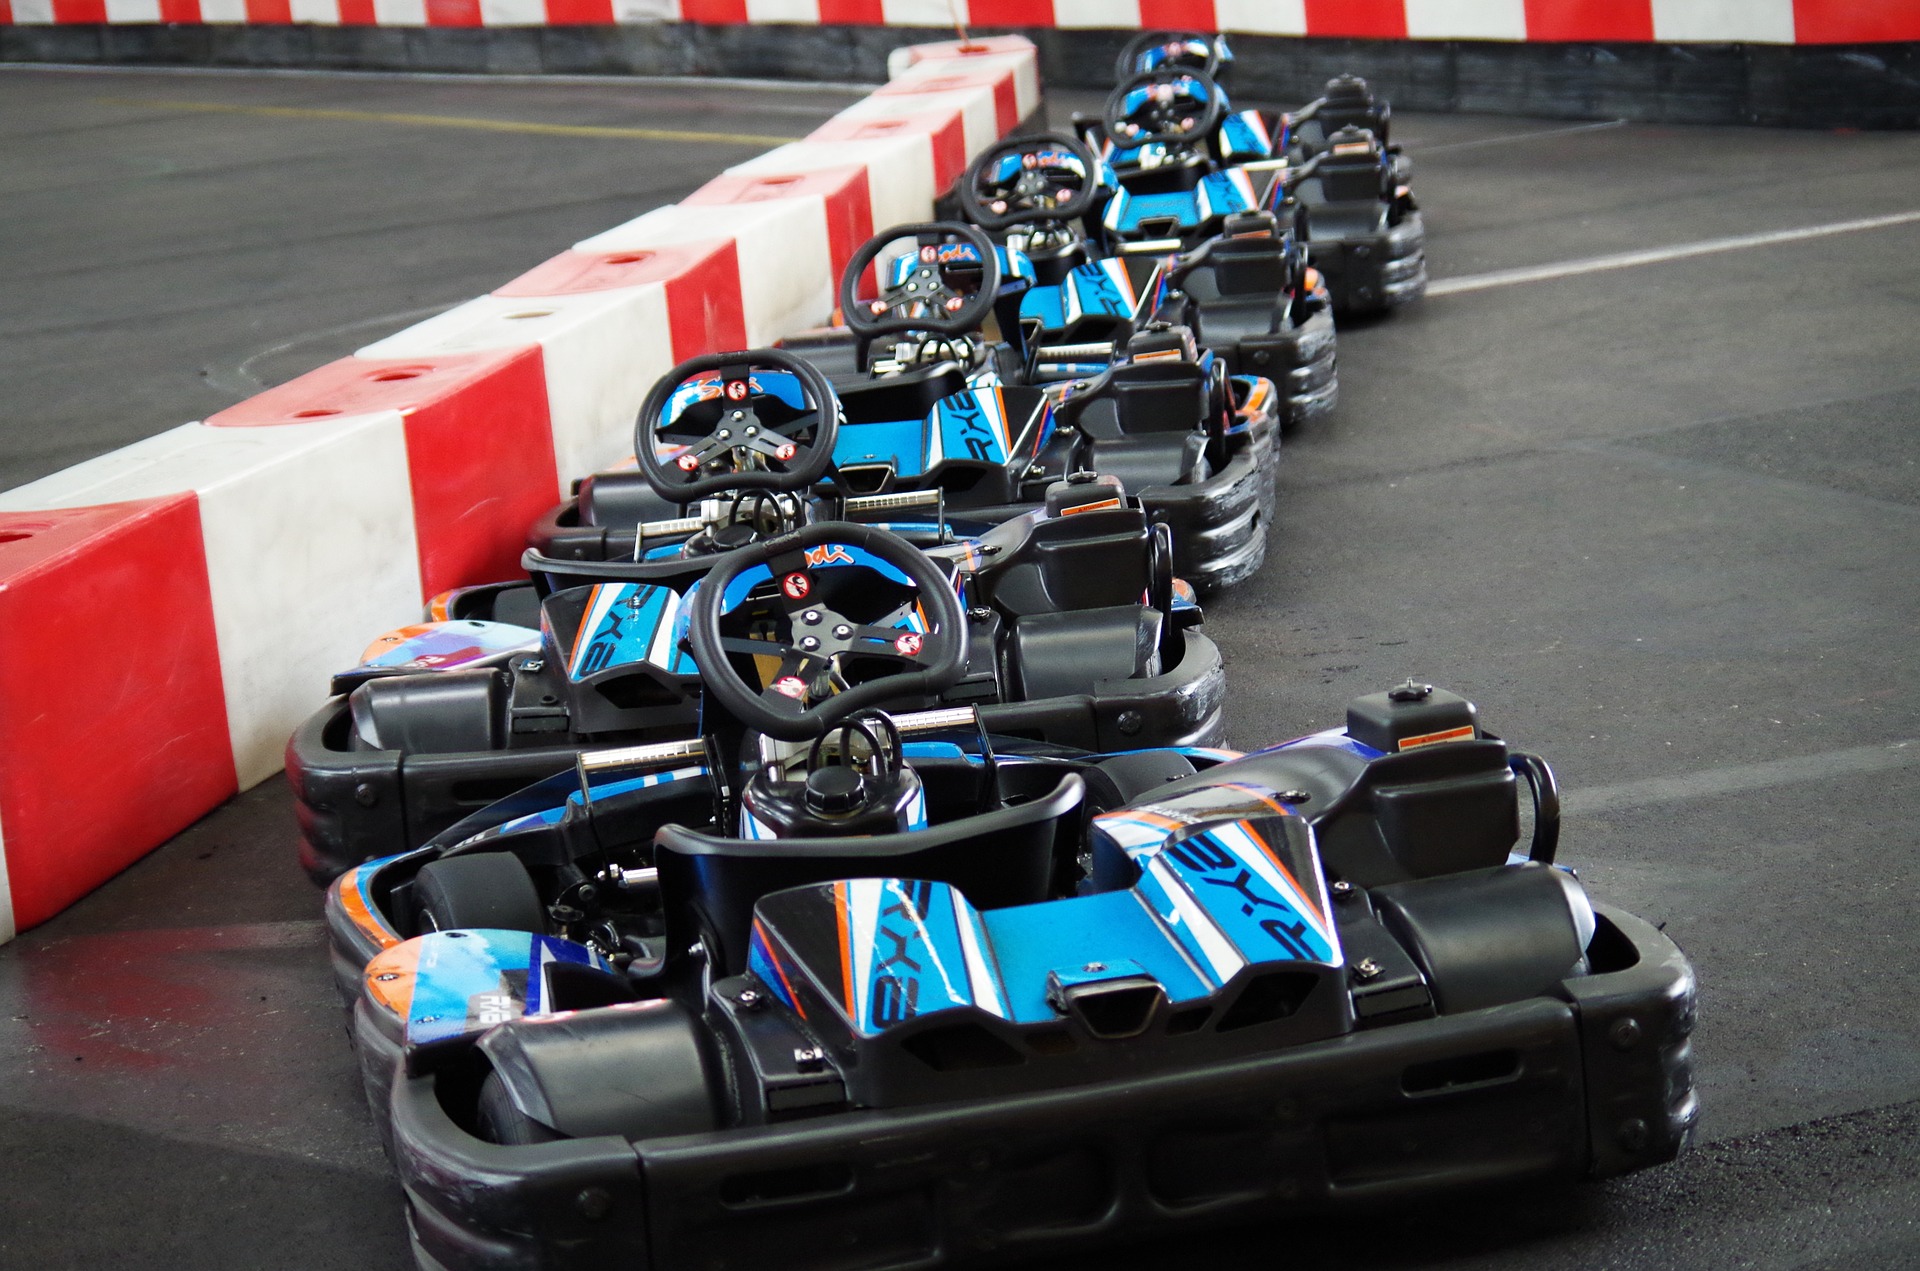 Racing Go Karts lined at the Race Track